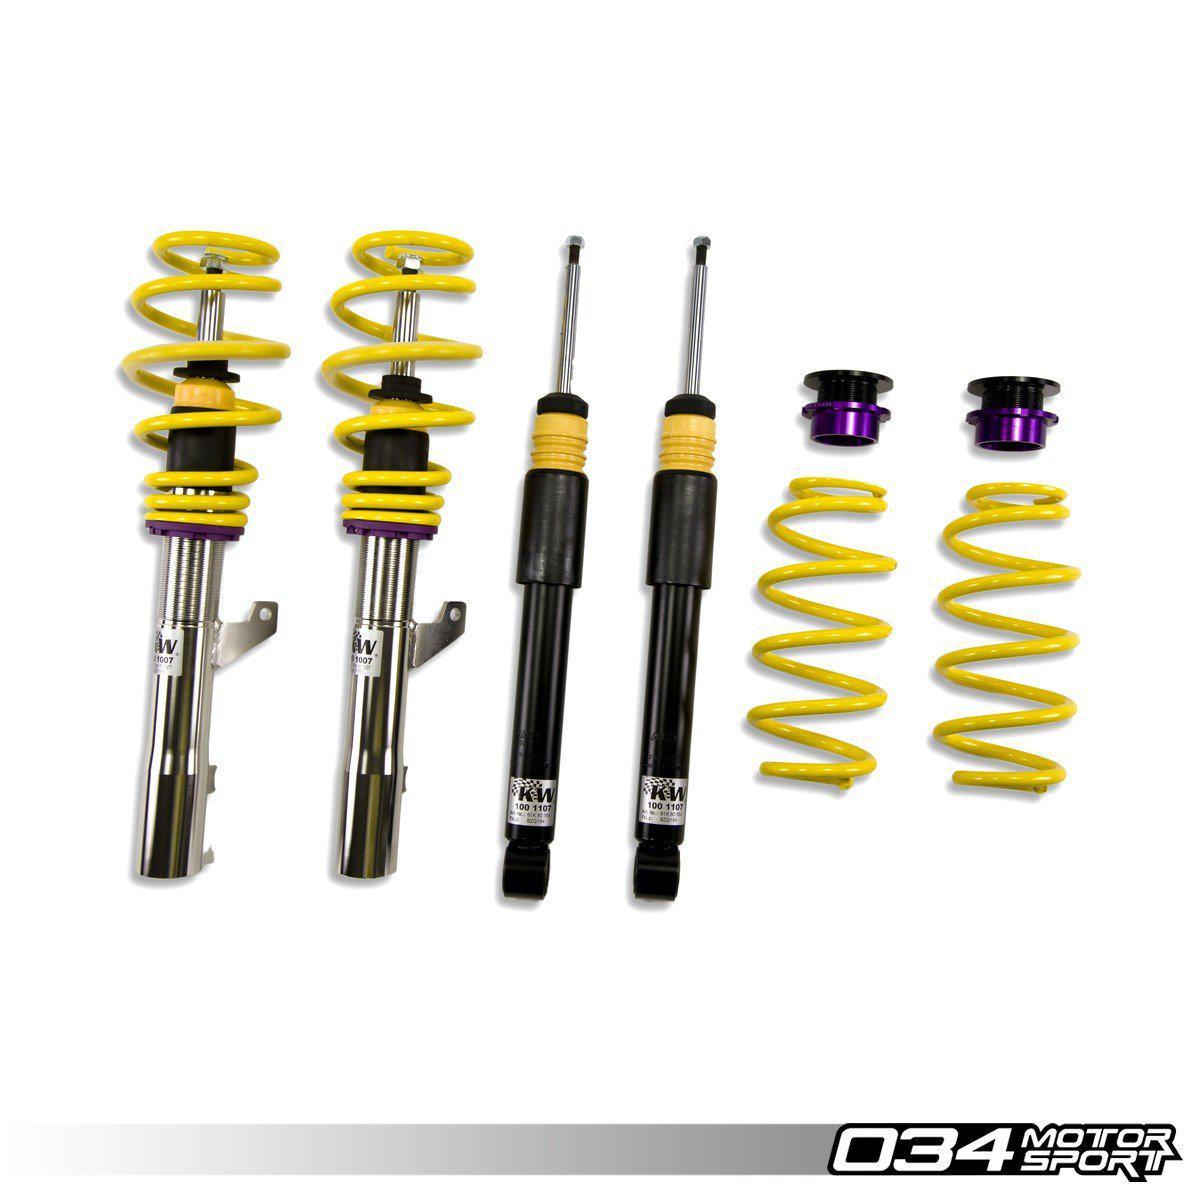 KW Variant 1 Coilover Suspension, MKVII Volkswagen GTI/Golf R With Dcc-A Little Tuning Co